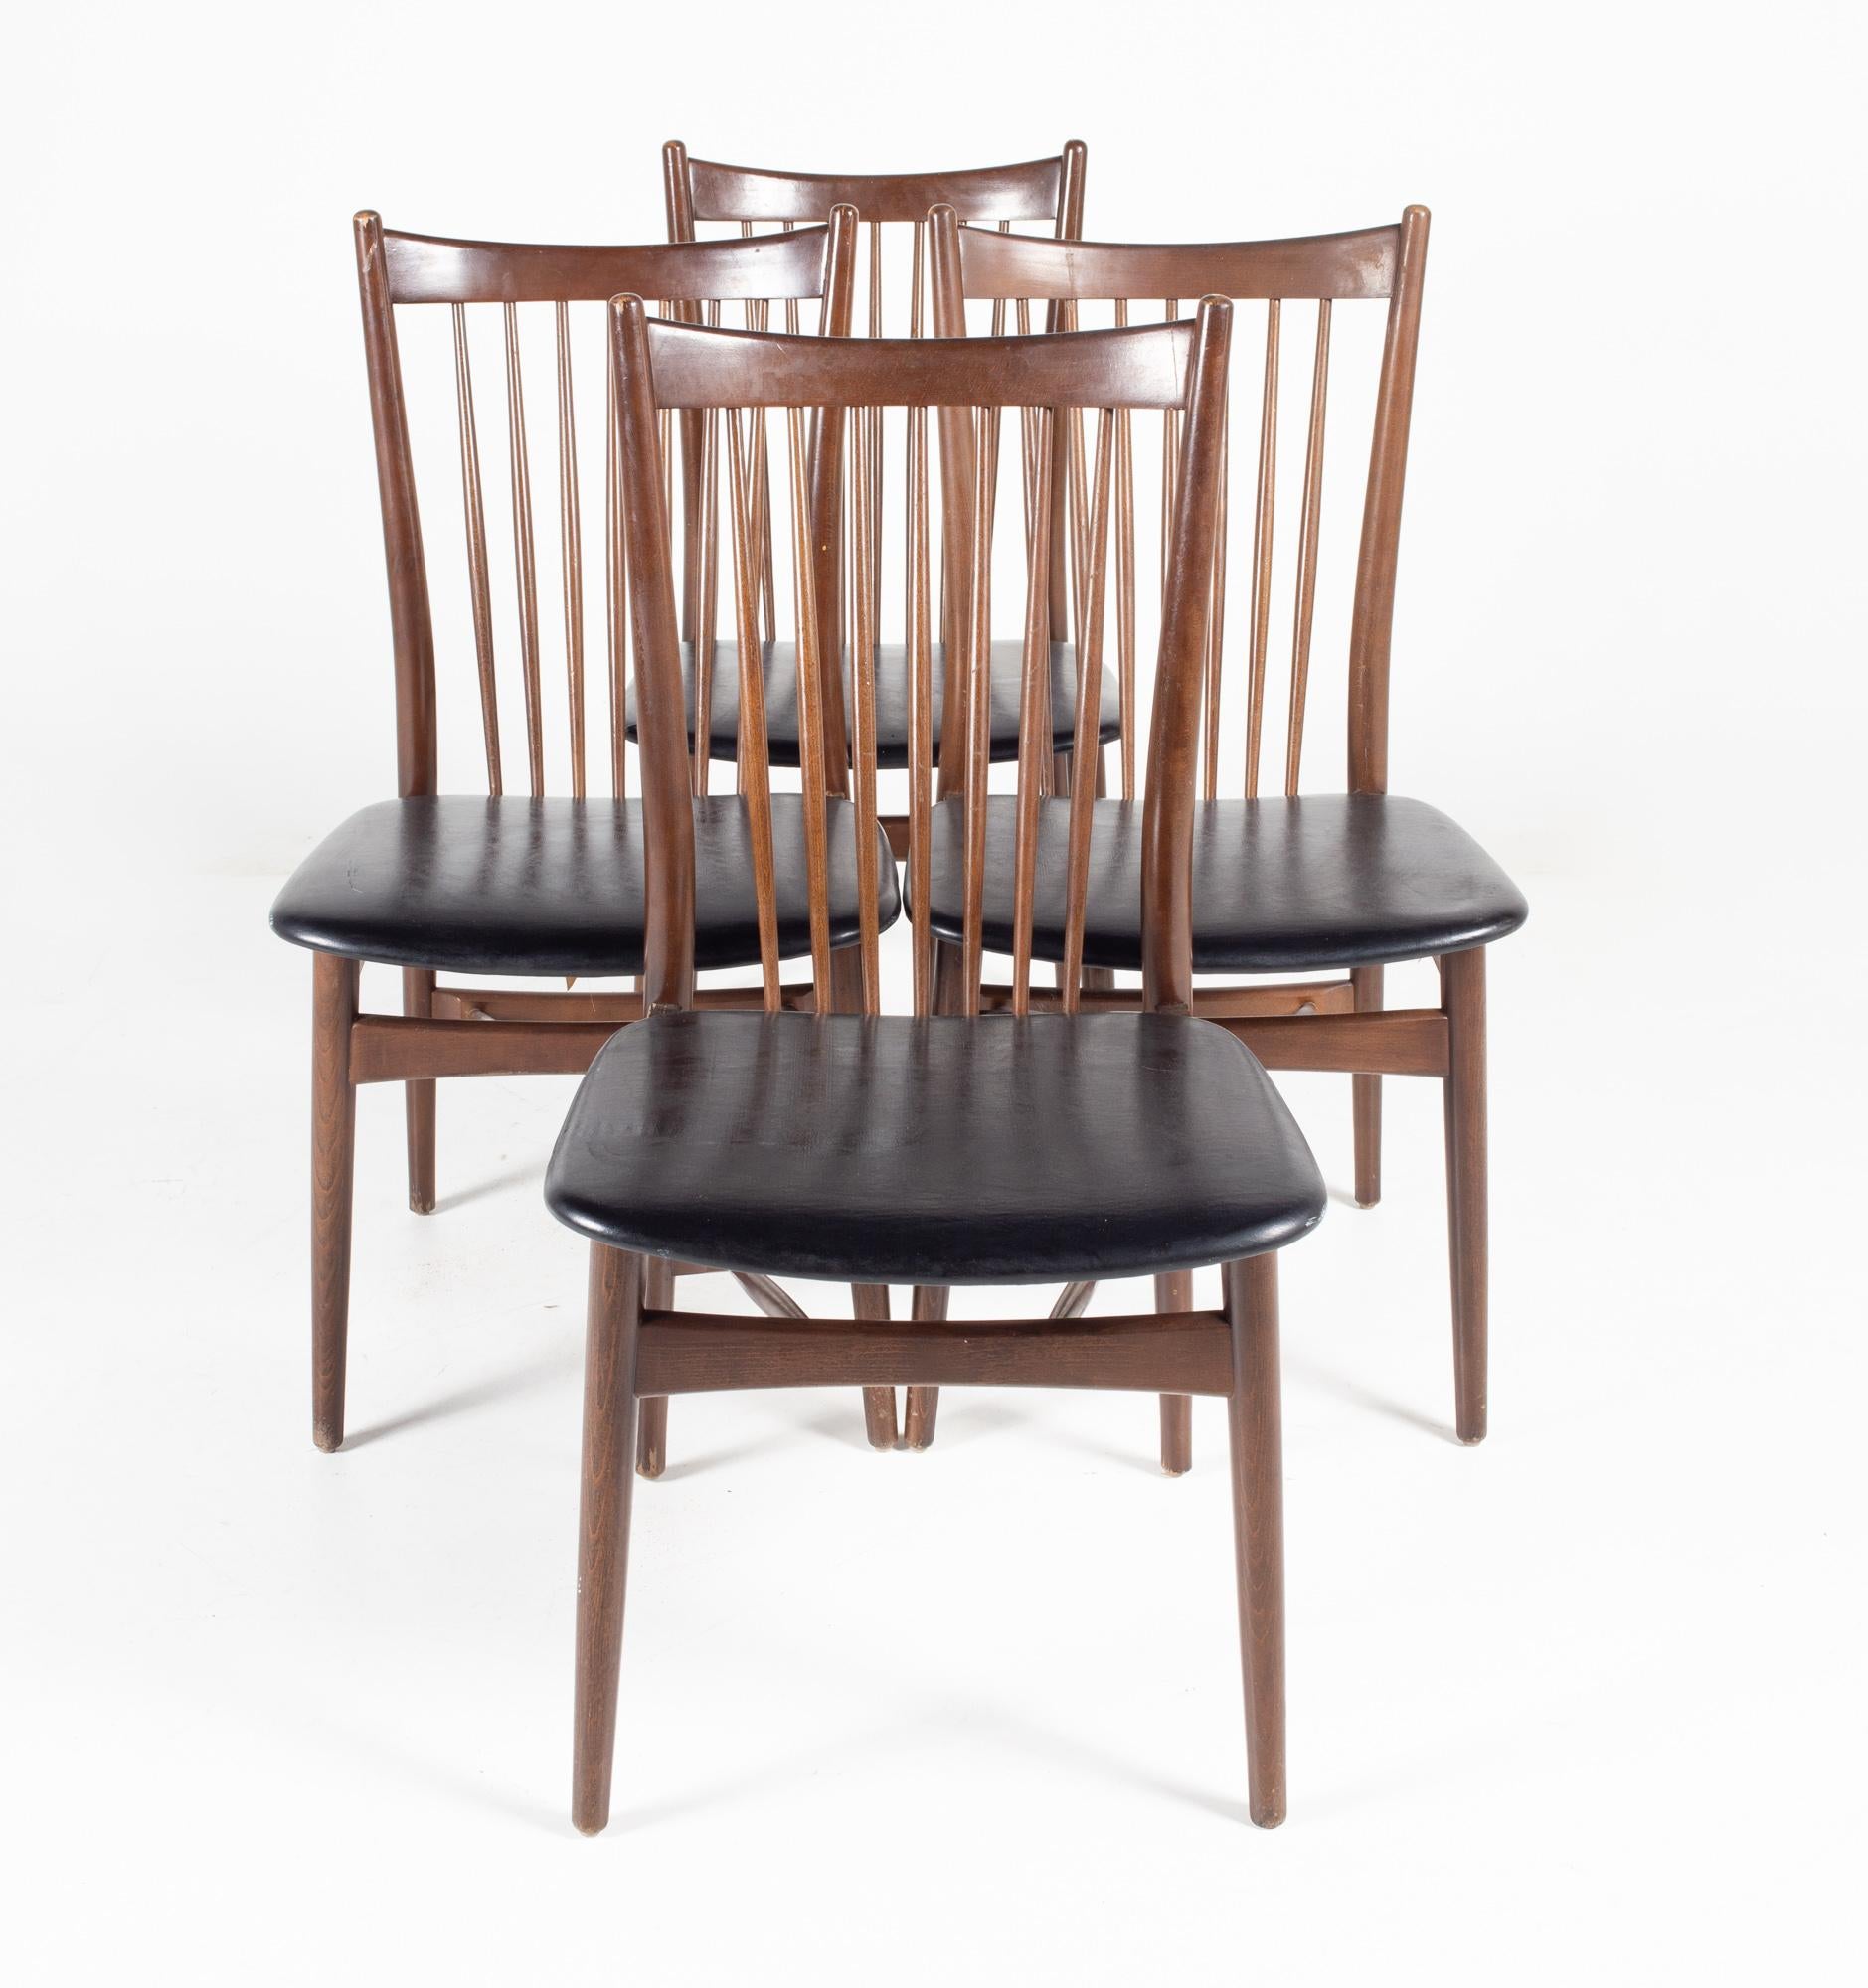 Viko Baumritter style mid century walnut dining chairs - set of 4

Each chair measures: 18 wide x 22 deep x 35 inches high, with a seat height of 17.5 inches 

All pieces of furniture can be had in what we call restored vintage condition. That